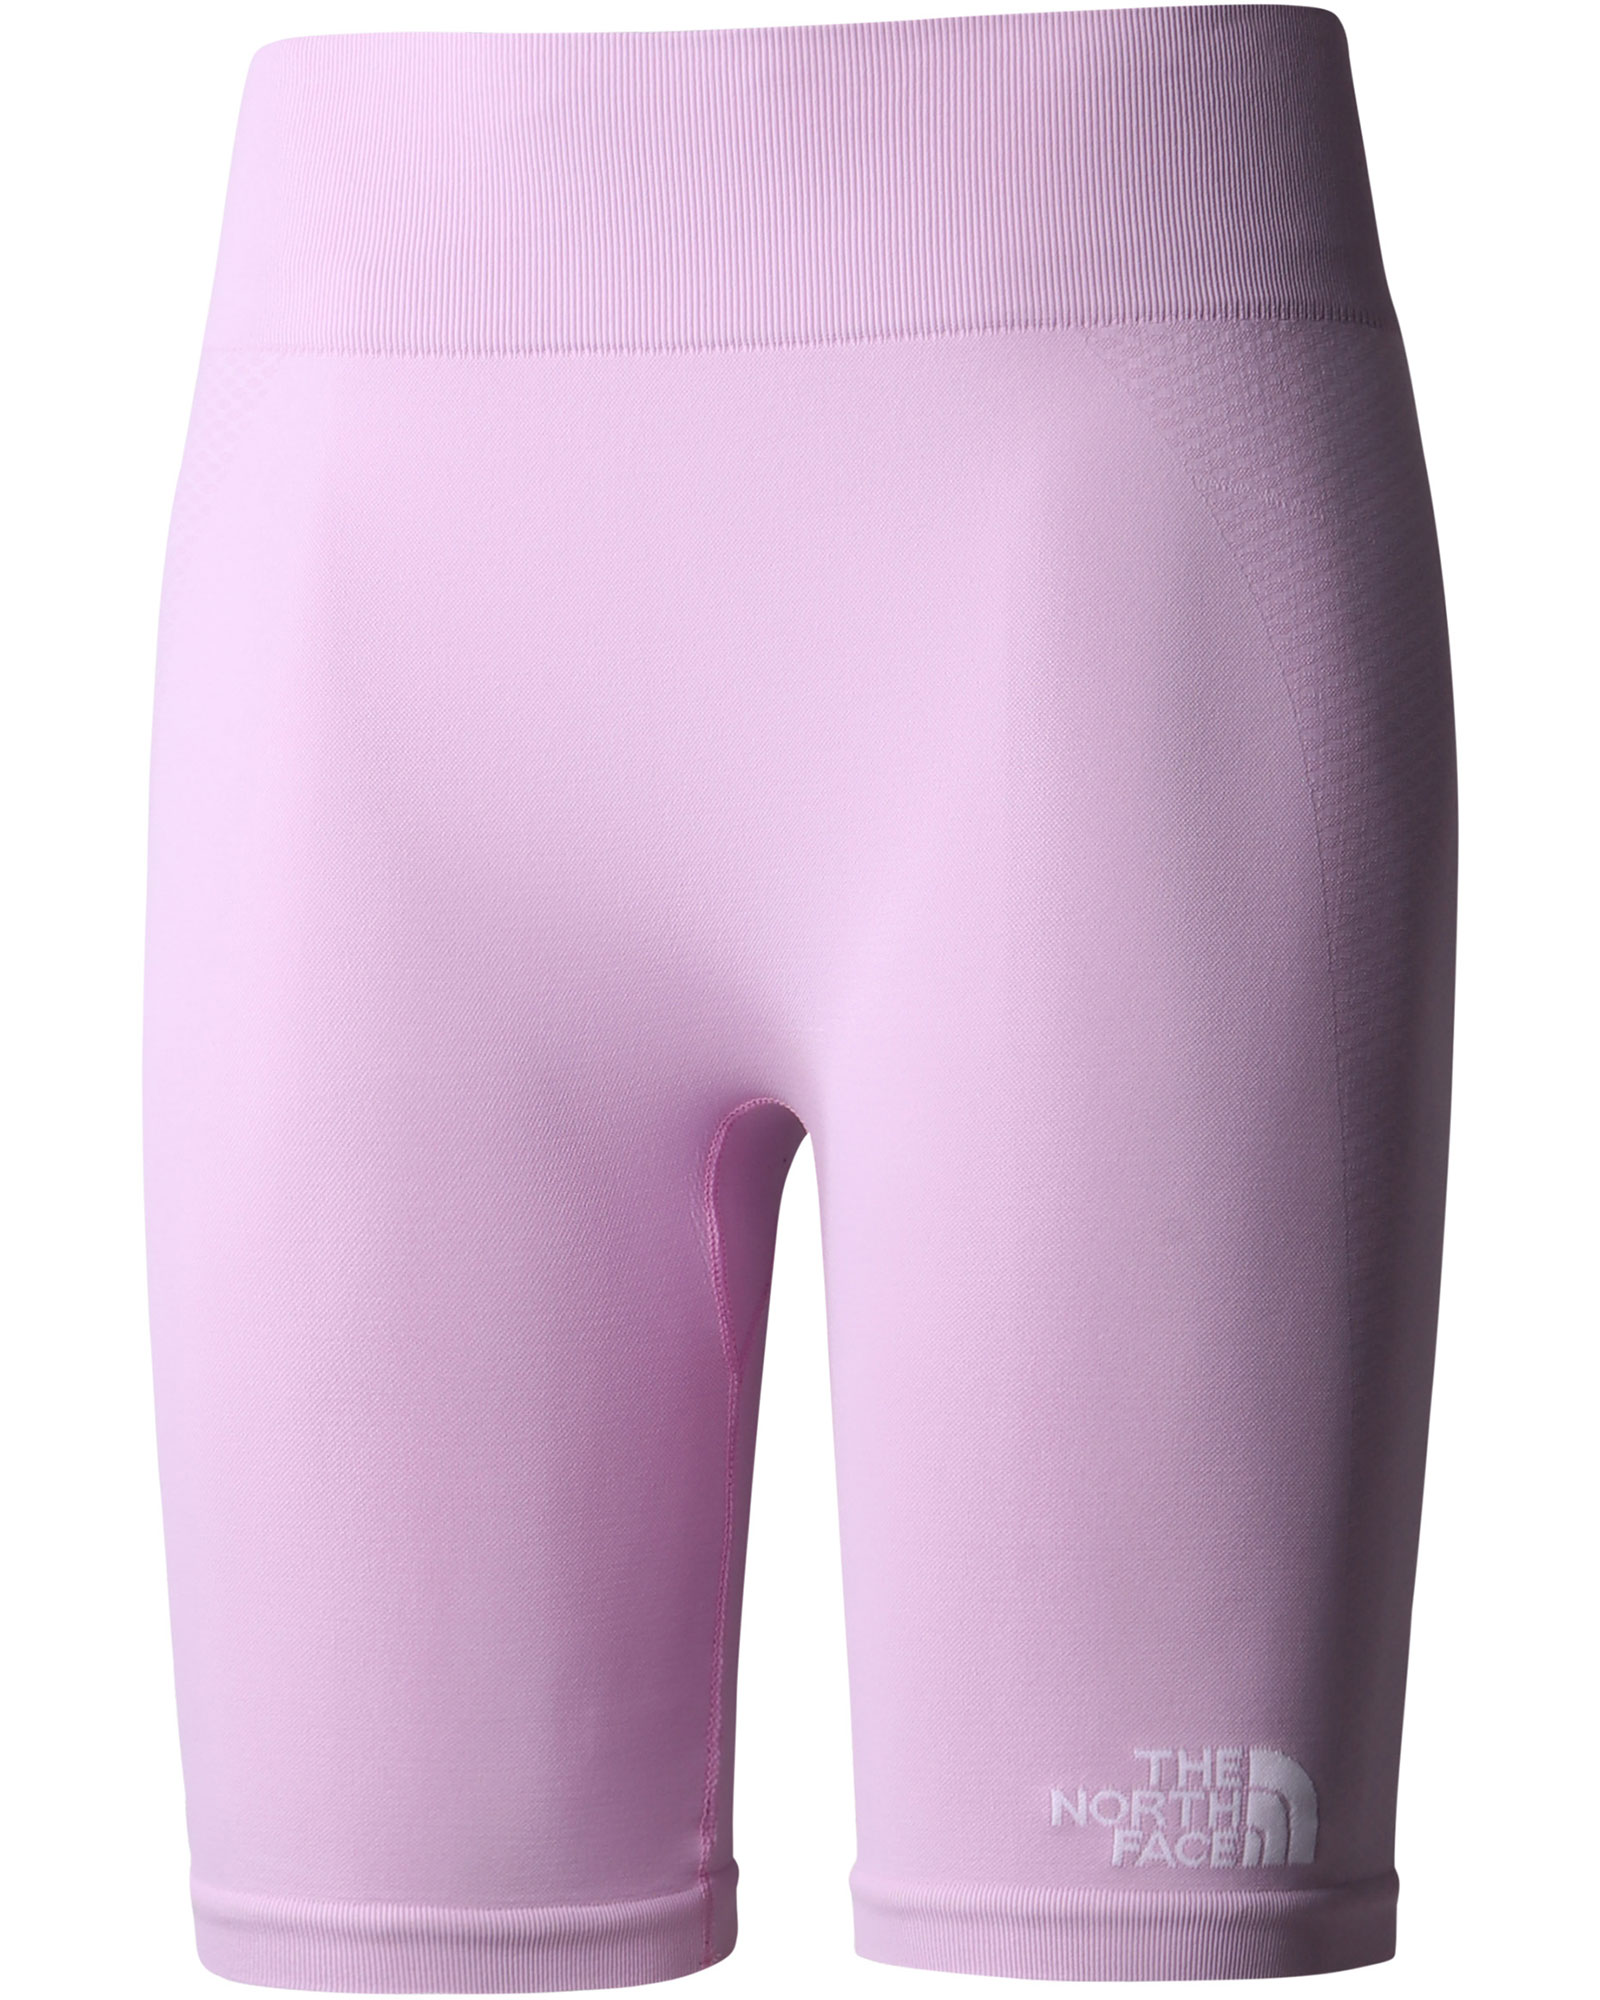 The North Face Women’s Seamless Shorts - Lupine S/M